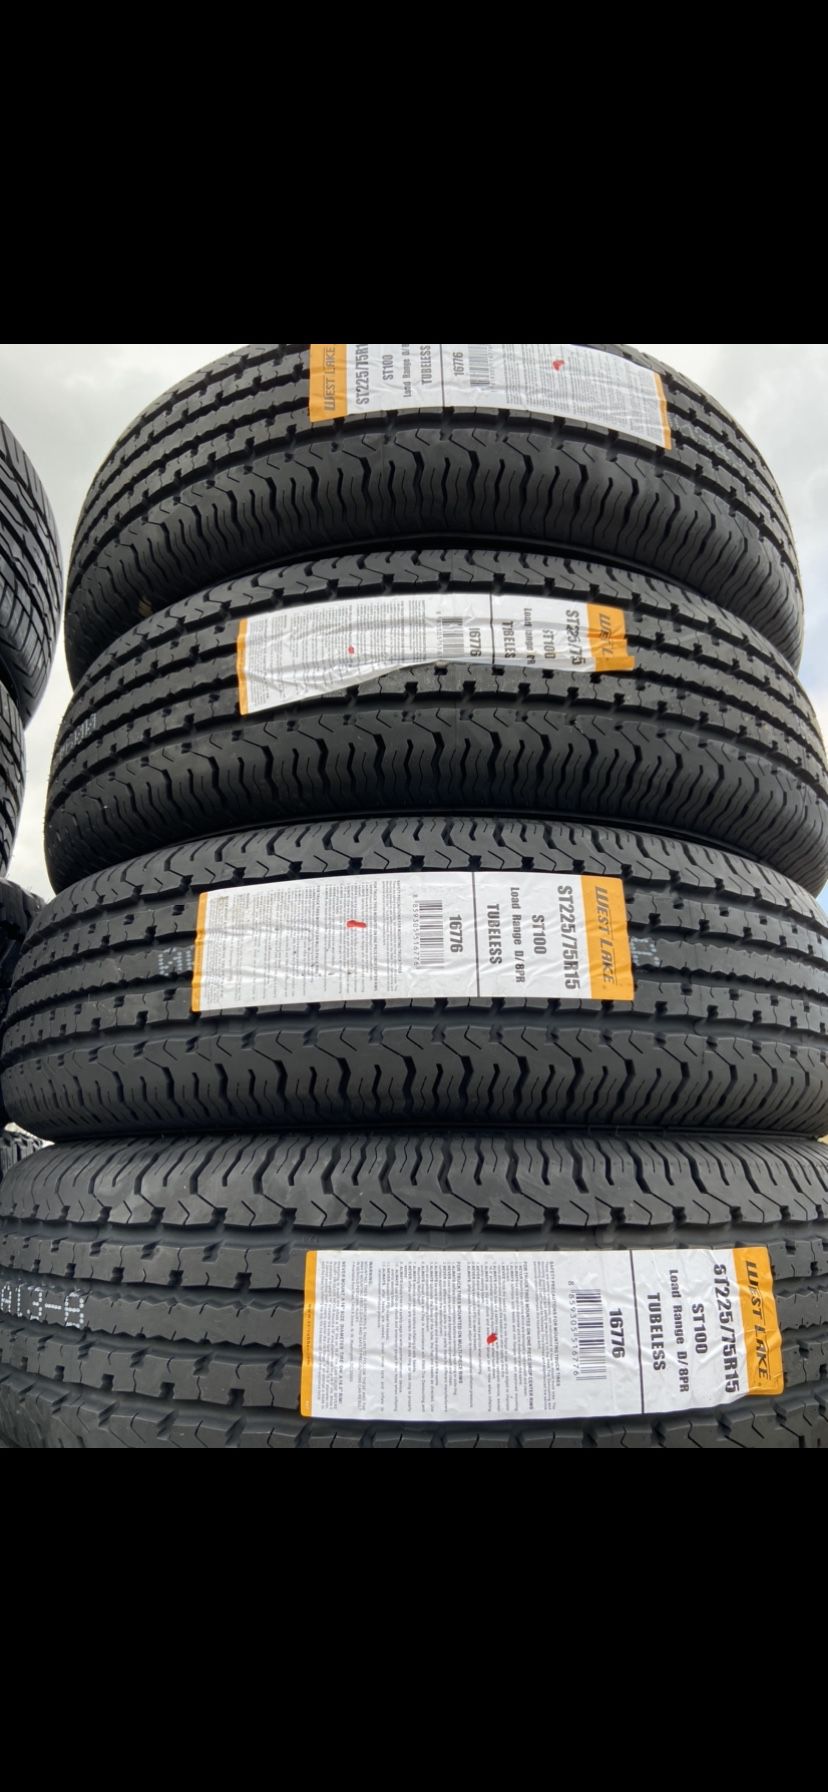 WEST LAKE Trailer tires ST225/75R15 $66 each new 8 ply trailer tires 225/75/15 8ply 225/75R/15 8ply